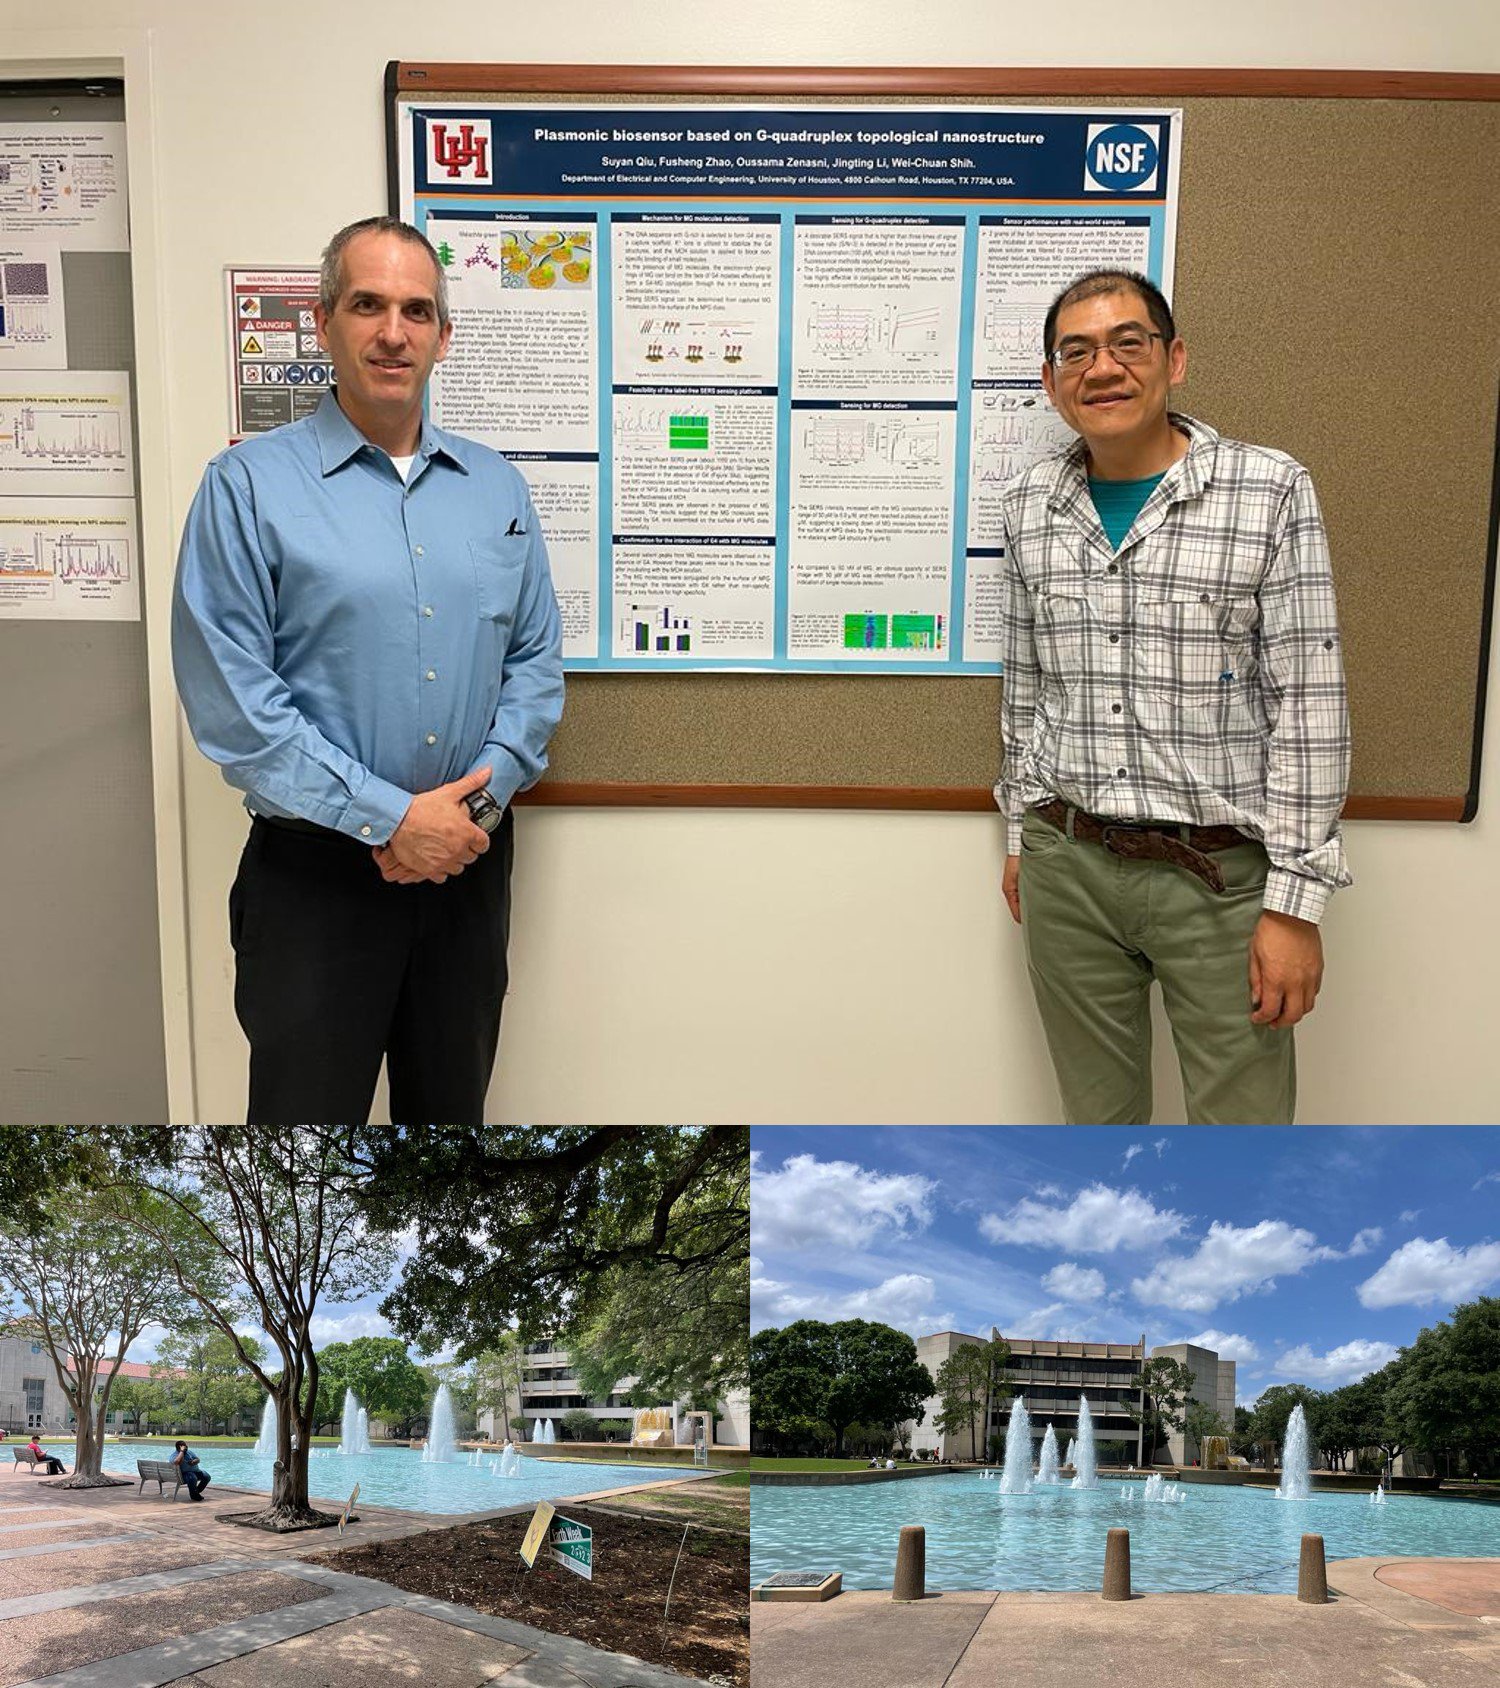 On the last week of April, Prof. Amos Danielli visited in the University of Houston. During his visit, Prof. Danielli met with Prof. Wei-Chuan Shih from the Faculty of Electrical and Computer Engineering and with Prof. Ran An from the Faculty of Biomedical Engineering. 

Prof. Wei-Chuan's research focuses on the development of new technology for biomedicine and portable chem/biosensing, surface-enhanced Raman spectroscopy (SERS), optical imaging, microscopy & spectroscopy, single nanoparticle (exosome, virus) analysis, disease diagnosis by virtual biopsy, N/MEMS/microfluidics, lab-on-a-chip, smartphone microscopy and portable chemical/biological sensor. 

Prof. Ran An's research focuses on the development, clinical translation, and potential commercialization of: 
1. Electrokinetic- and electrochemical-driven microfluidic biosensors for rapid and affordable point-of-care disease diagnostics and monitoring.
2. Organ-on-chip functional assays to facilitate a fundamental understanding of disease pathophysiology, drug testing, and personalized healthcare, with a specific interest in human microcirculatory health.